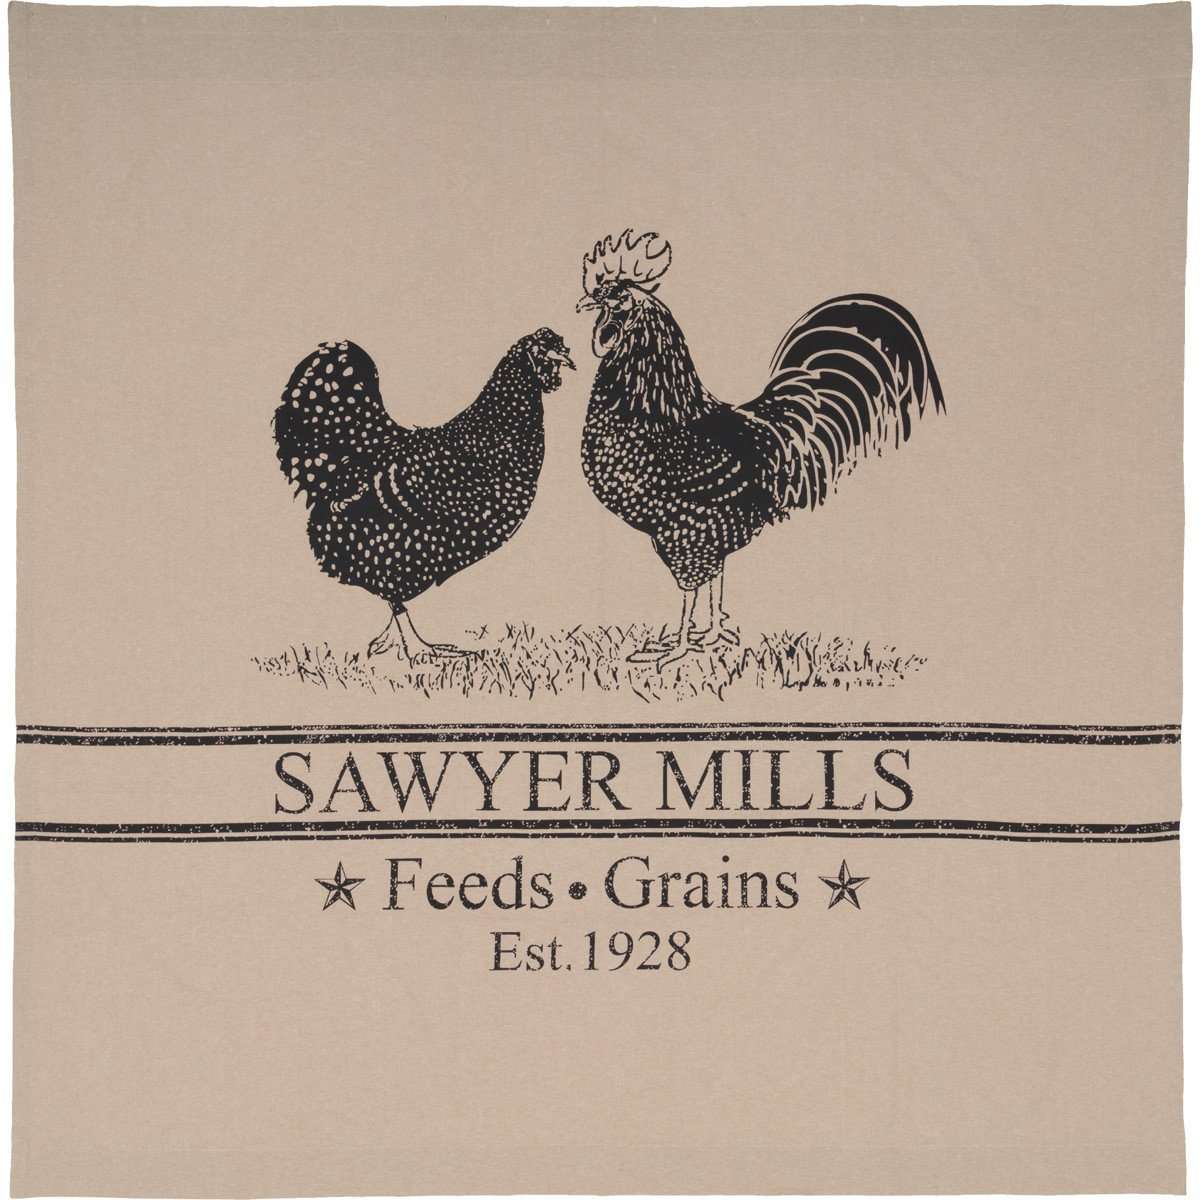 Sawyer Mill Charcoal Poultry Shower Curtain 72"x72" curtain VHC Brands 